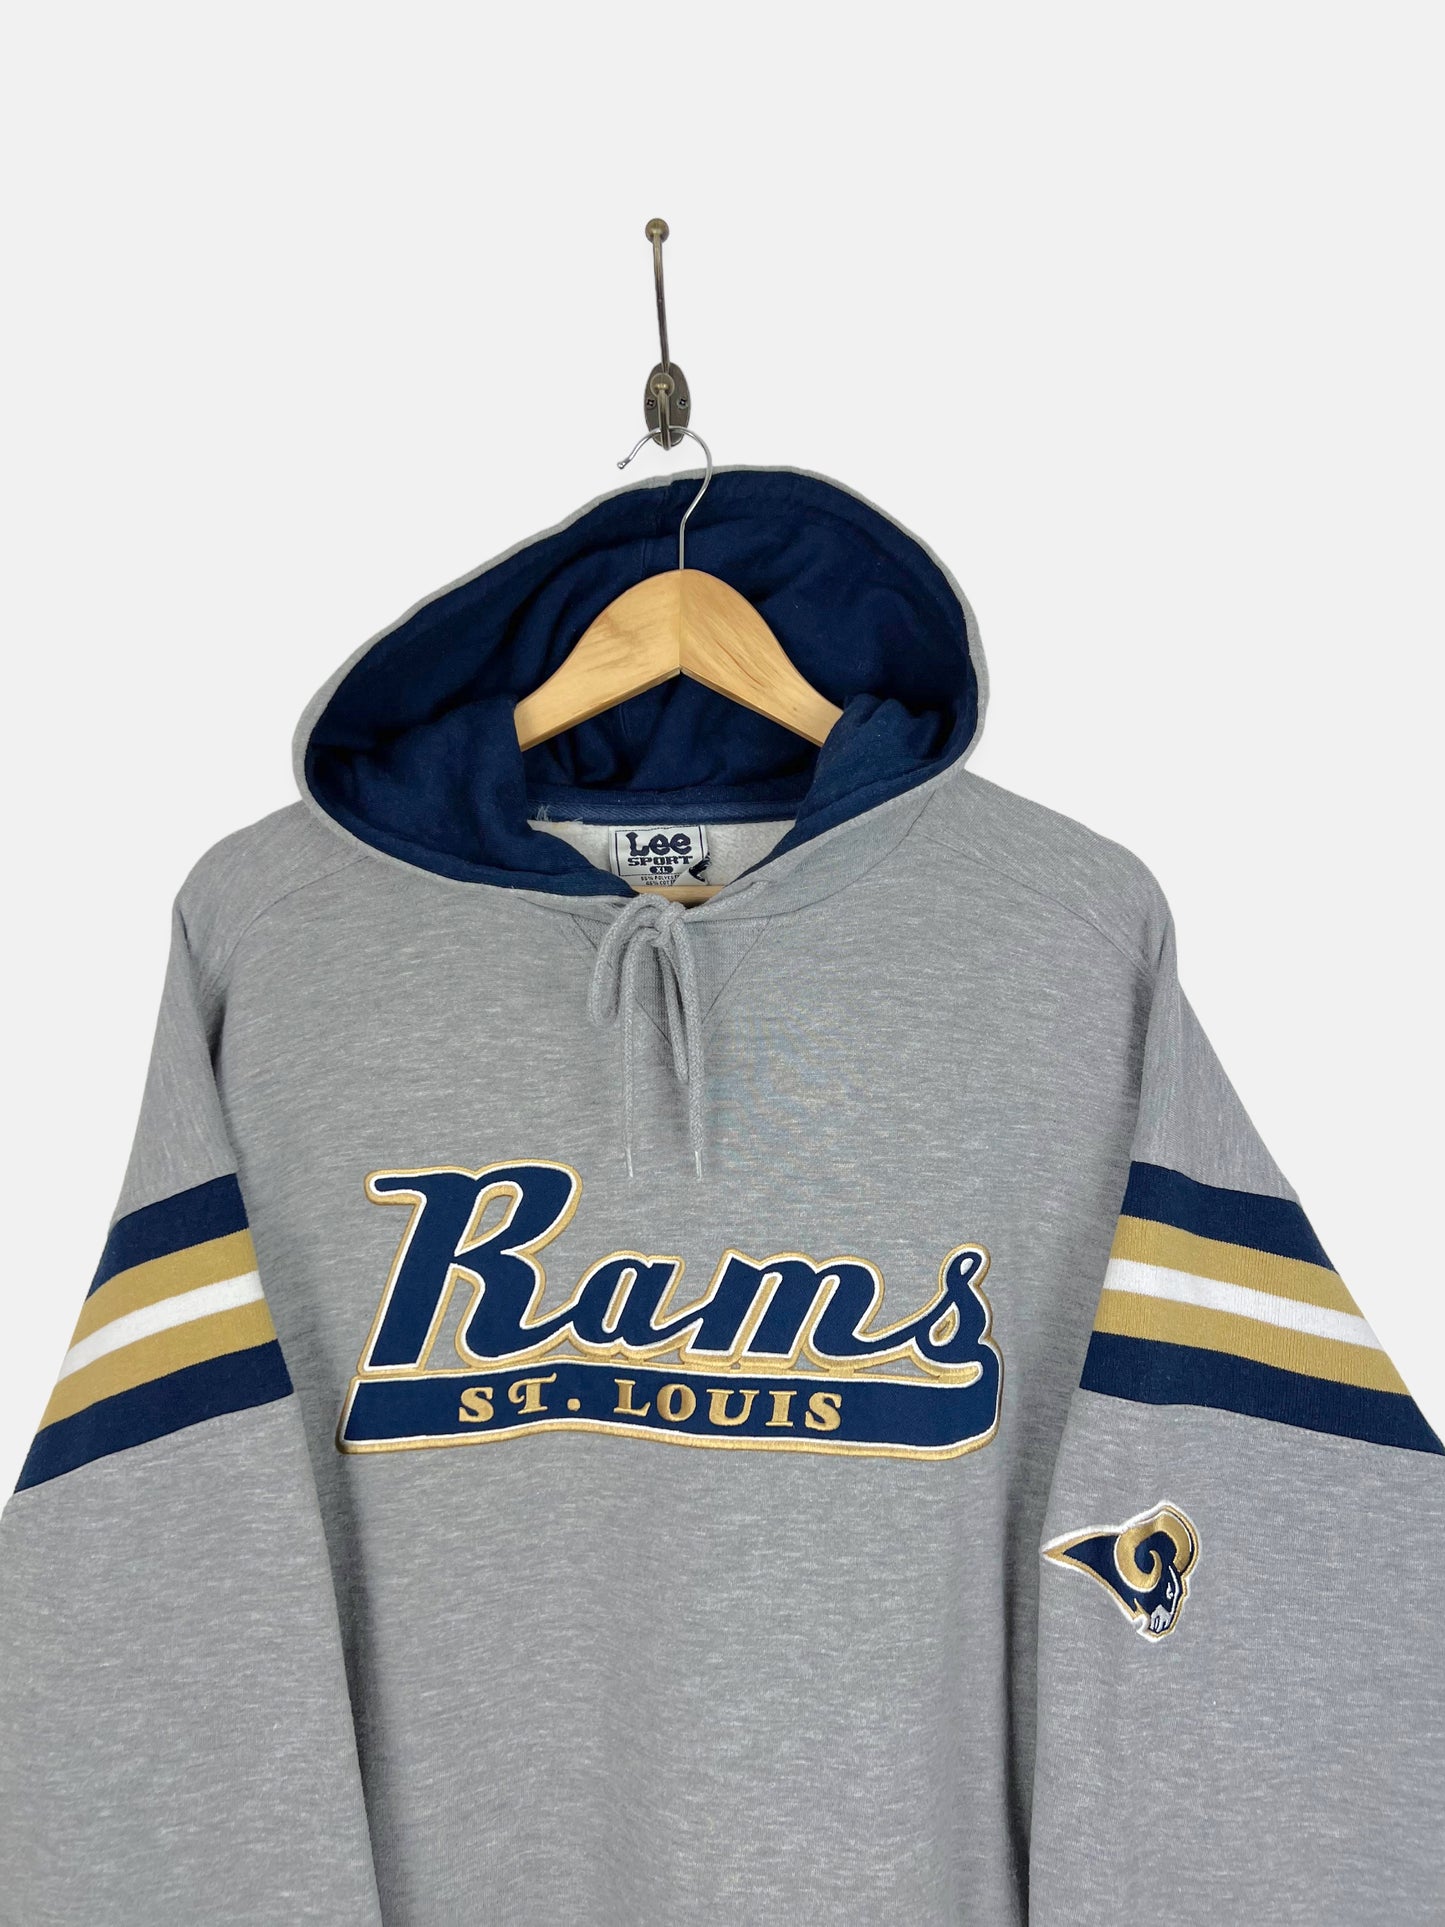 90's St Louis Rams NFL Embroidered Vintage Hoodie Size XL-2XL